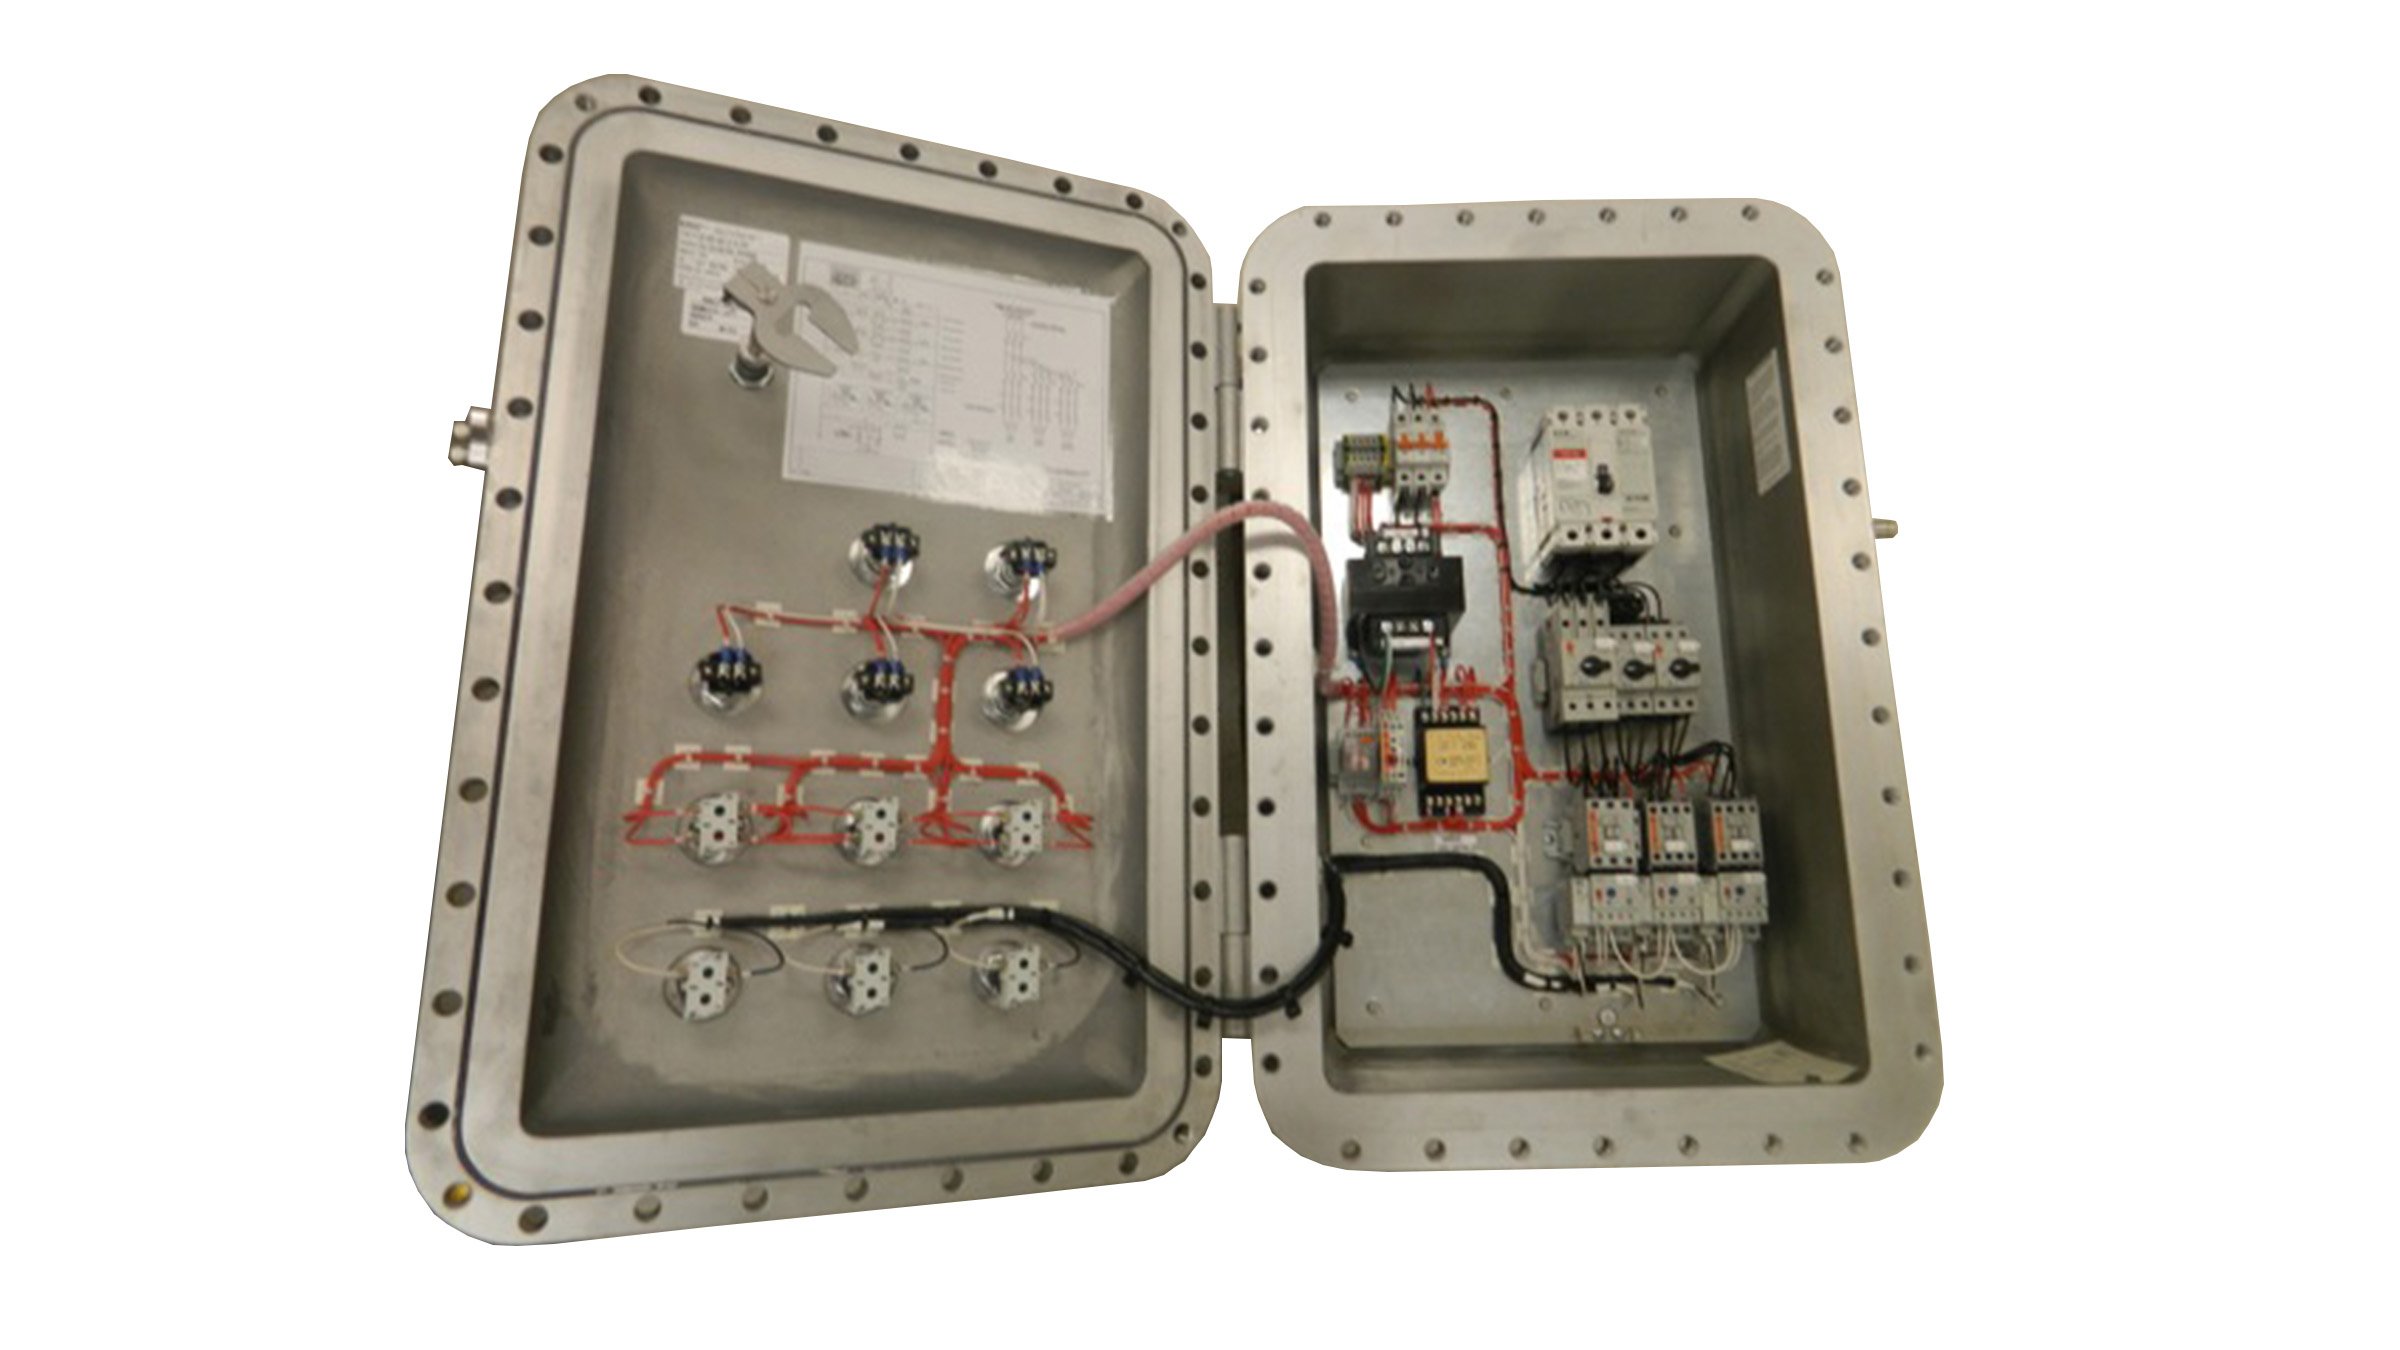 Explosion proof starter panel for controlling pumps in a distillery